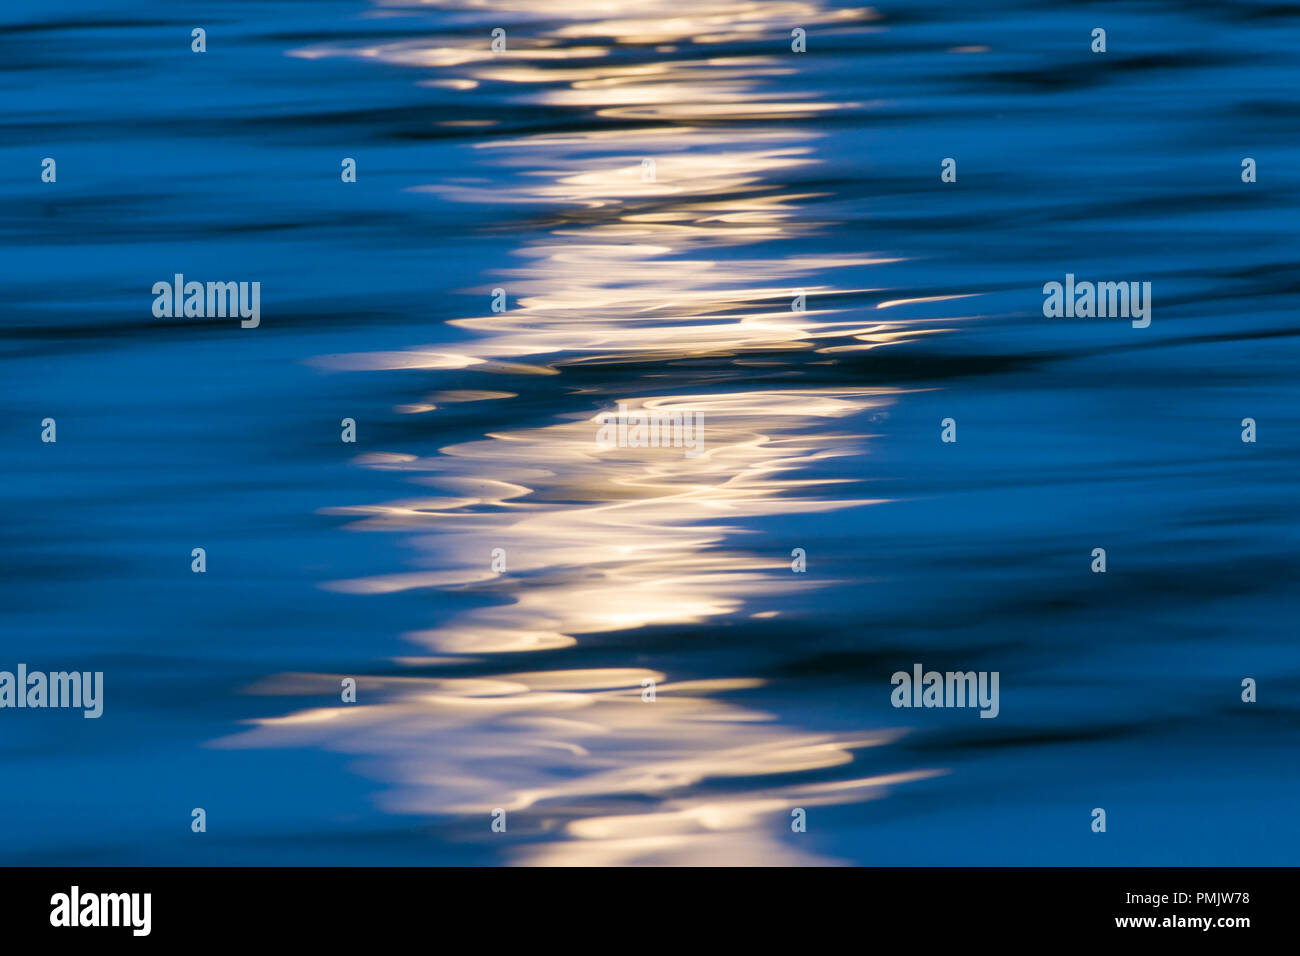 Abstract 'painting' of moonlight on water. Stock Photo